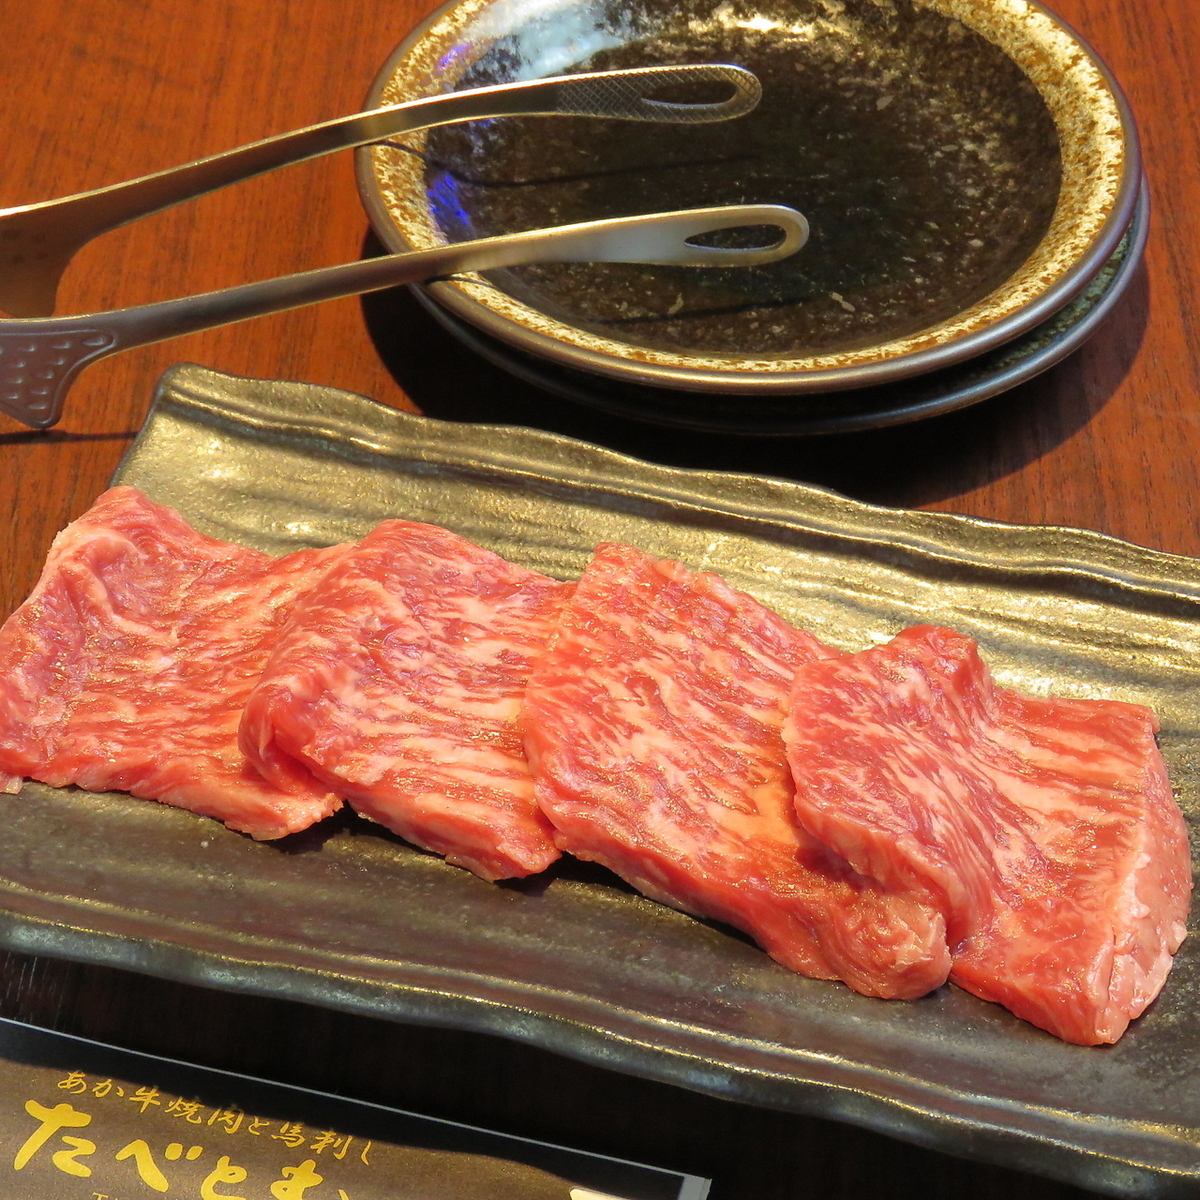 One of the few shops in Tokyo where you can eat the super rare Japanese beef "Aka beef"!